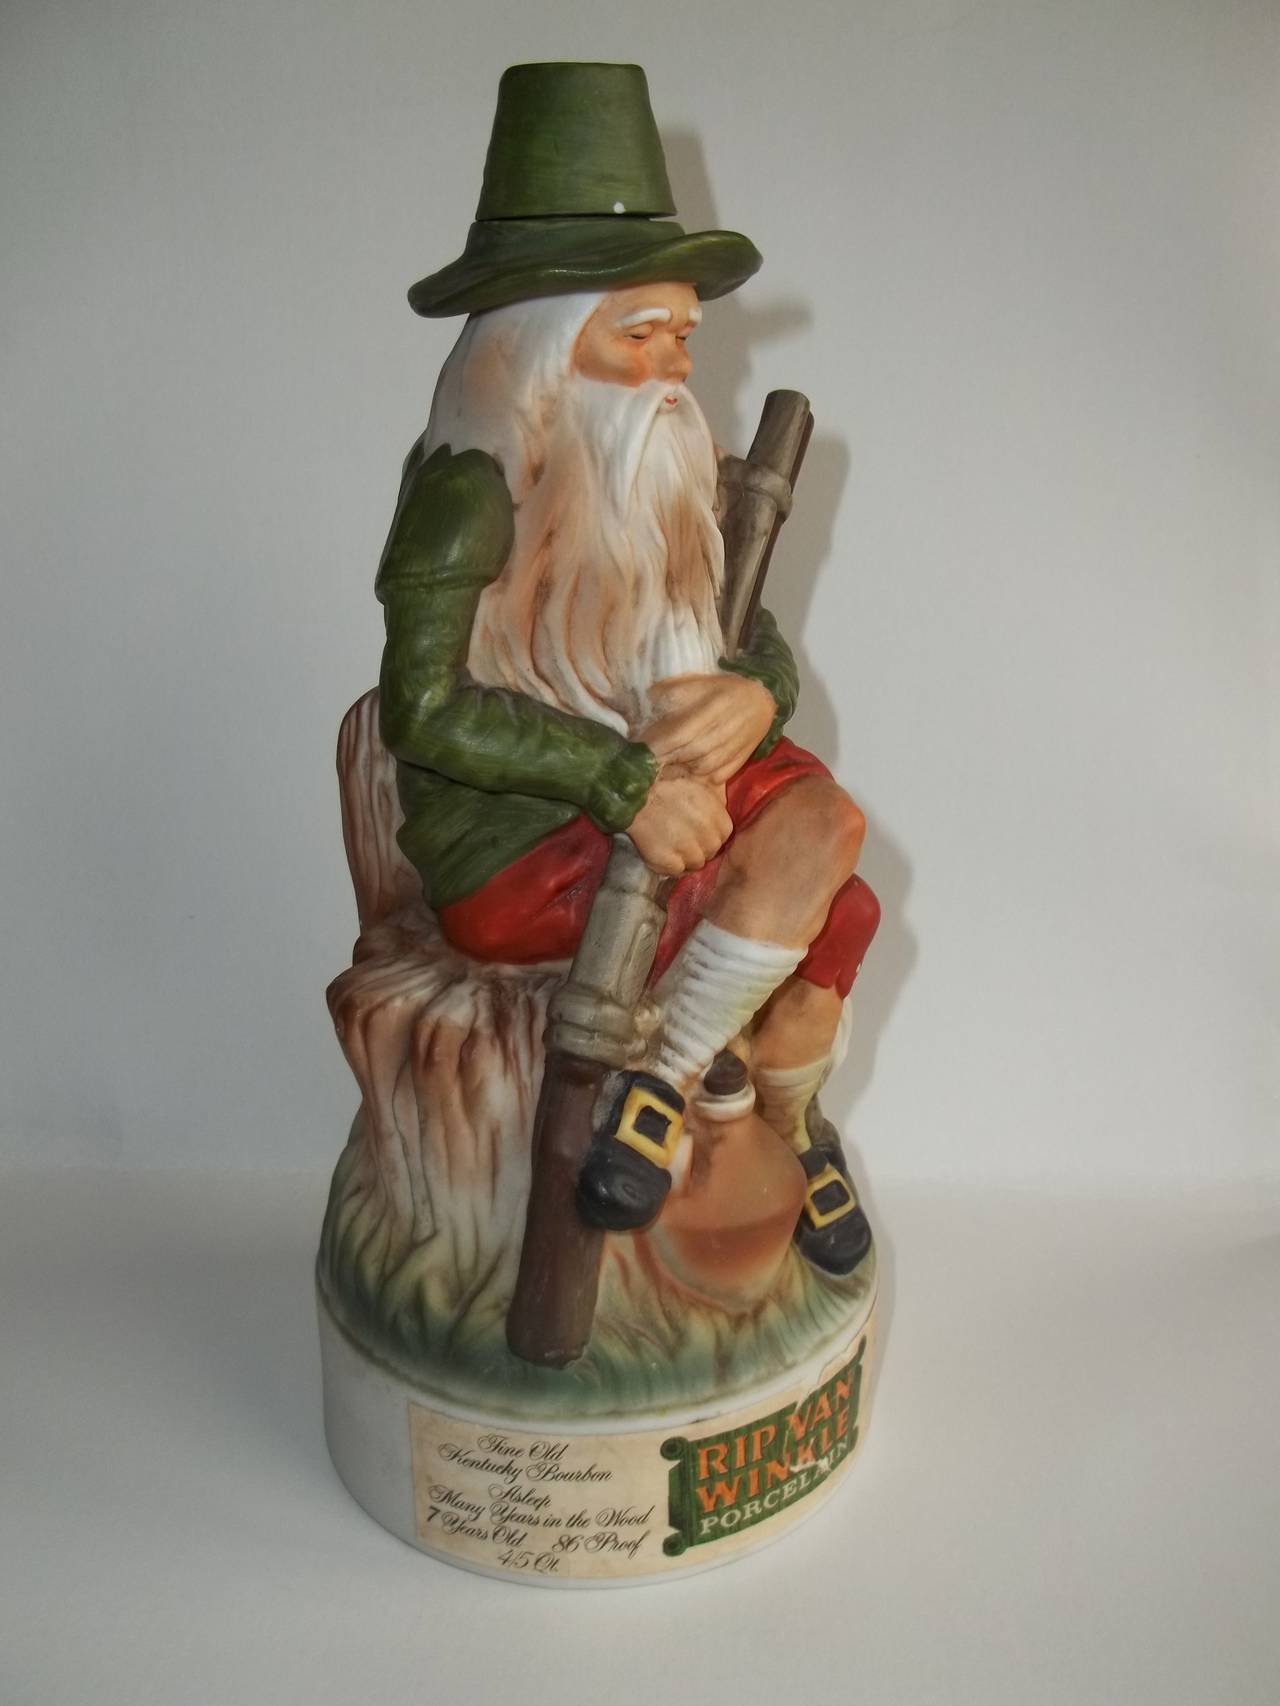 This is a good vintage collectible porcelain decanter for the very fine Rip Van Winkle Kentucky bourbon. Old Rip Van Winkle is hangin' with his gnomie, taking a snooze on the stump with gun in hand.

All original with corked top

The label is